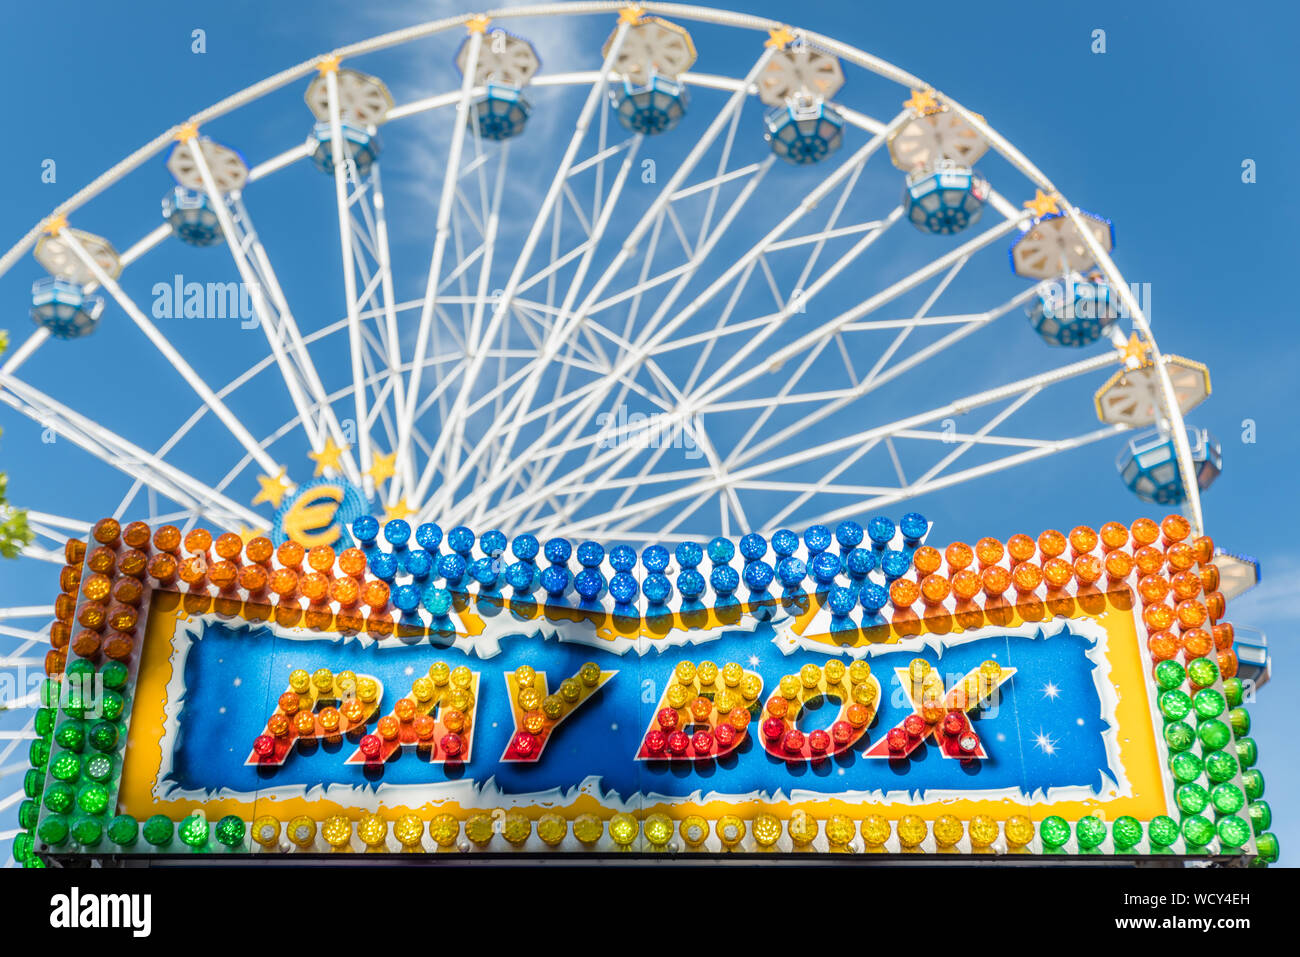 Fancy fair signs for banners and text for commercial use Stock Photo